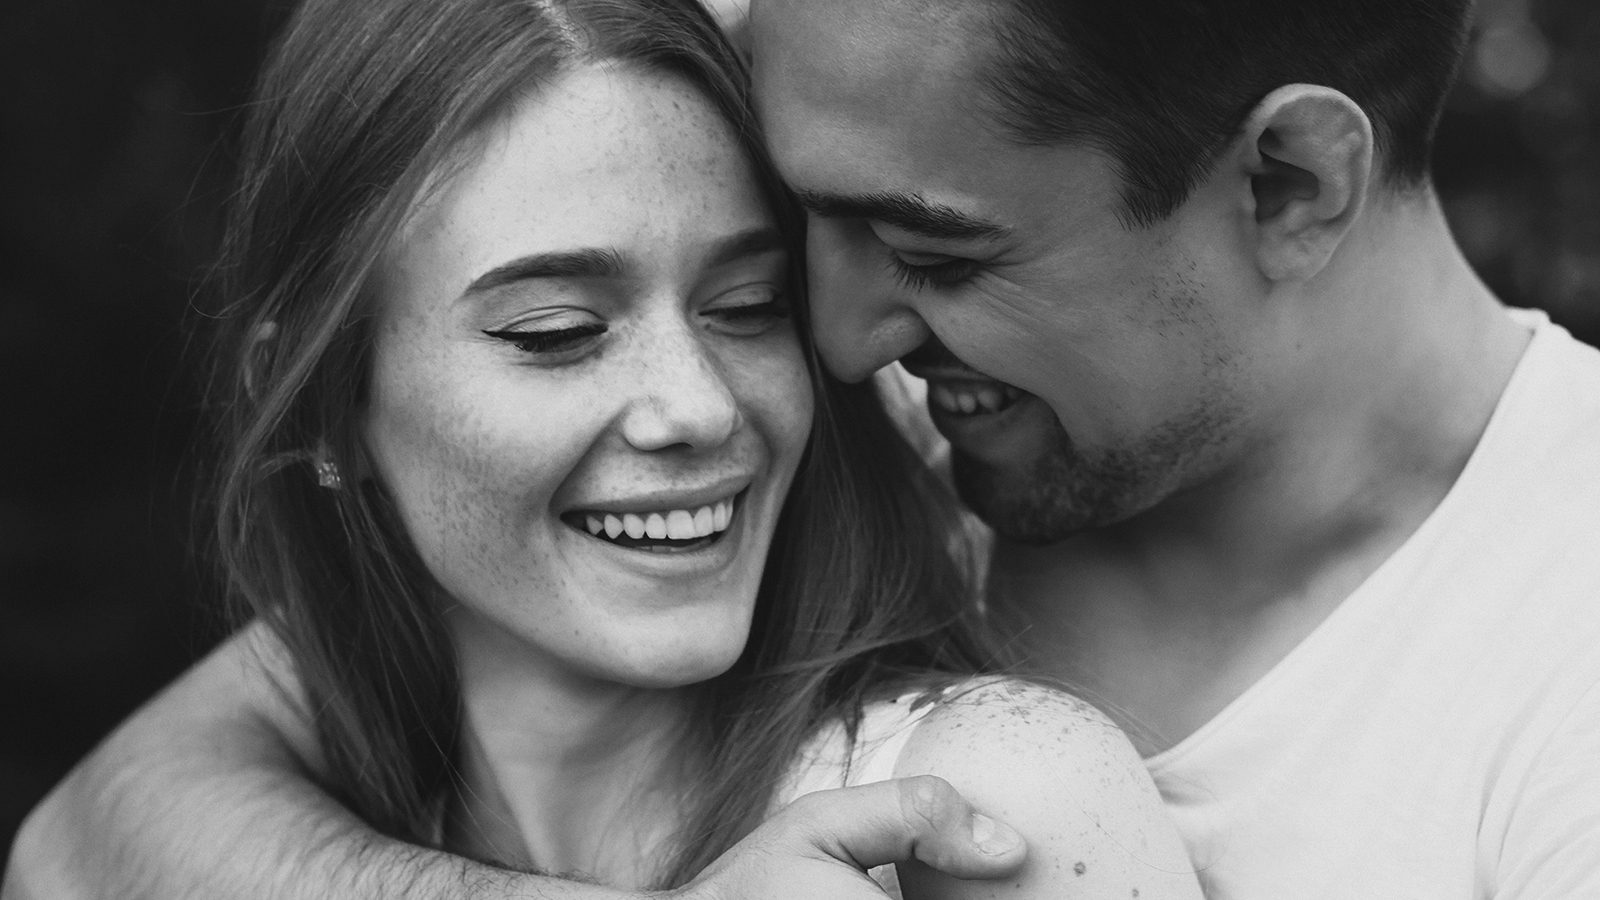 12 Relationship Behaviors Someone Shows When They Make You A Priority